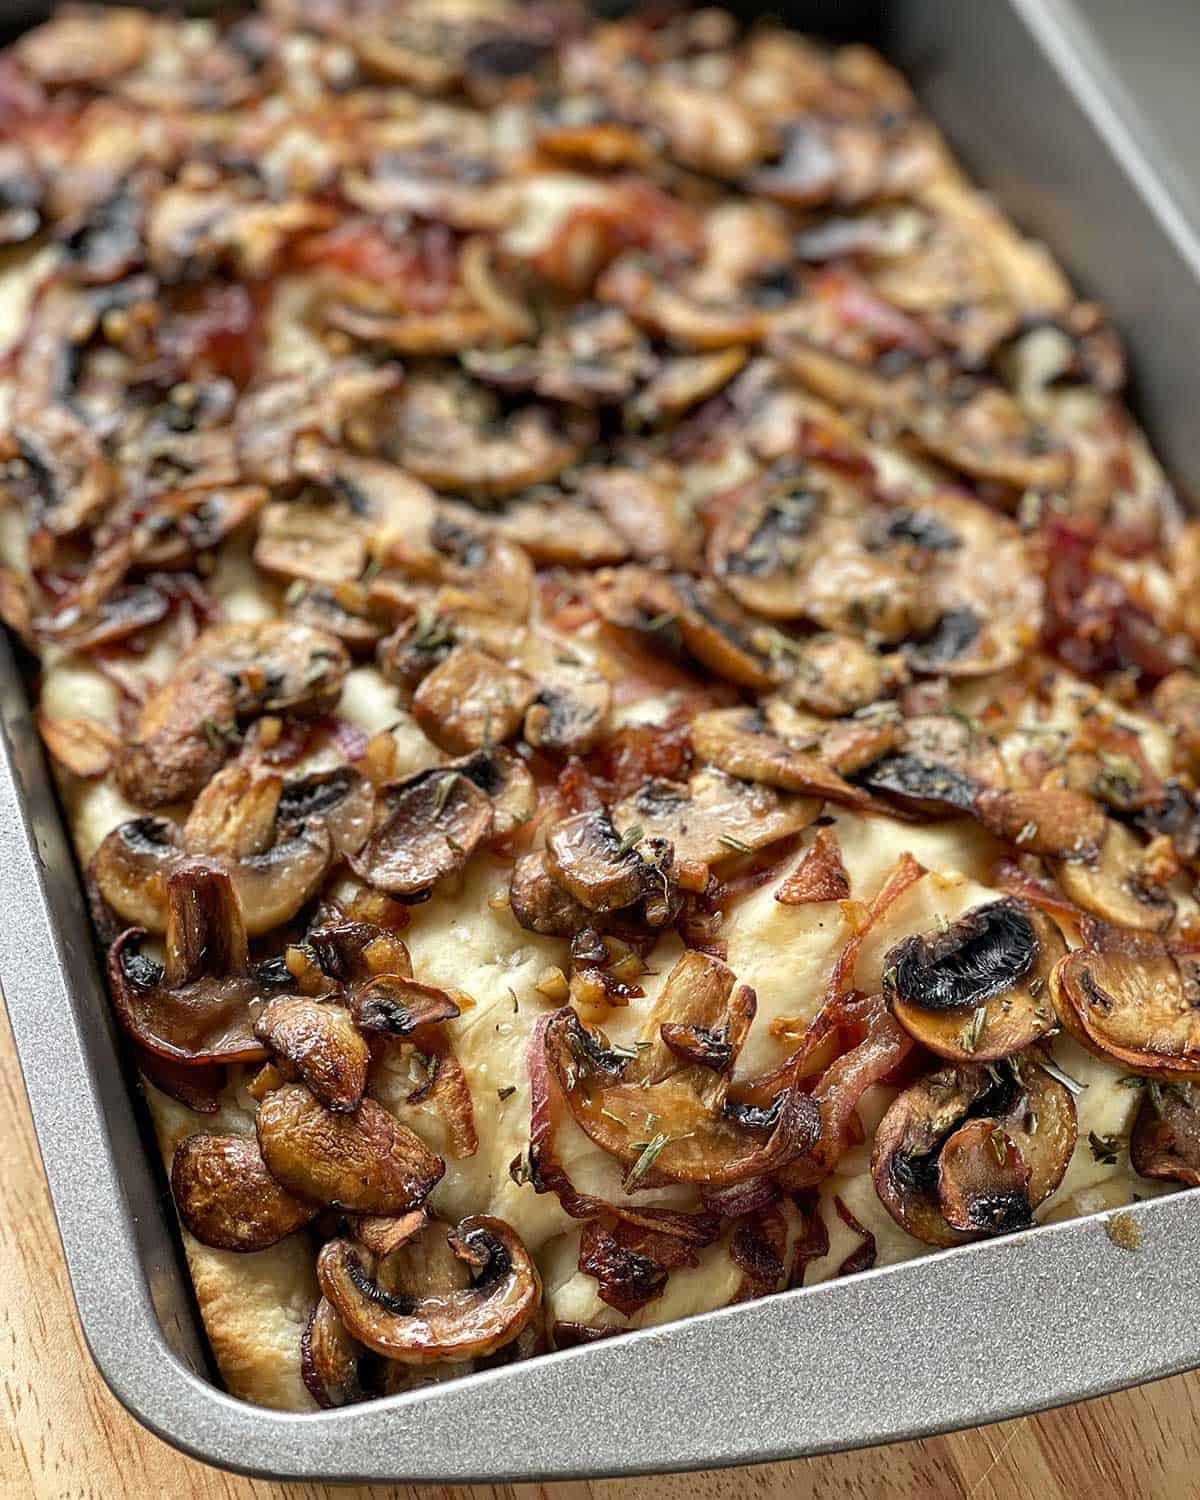 A close up of a cooked Mushroom Focaccia in a grey baking dish.